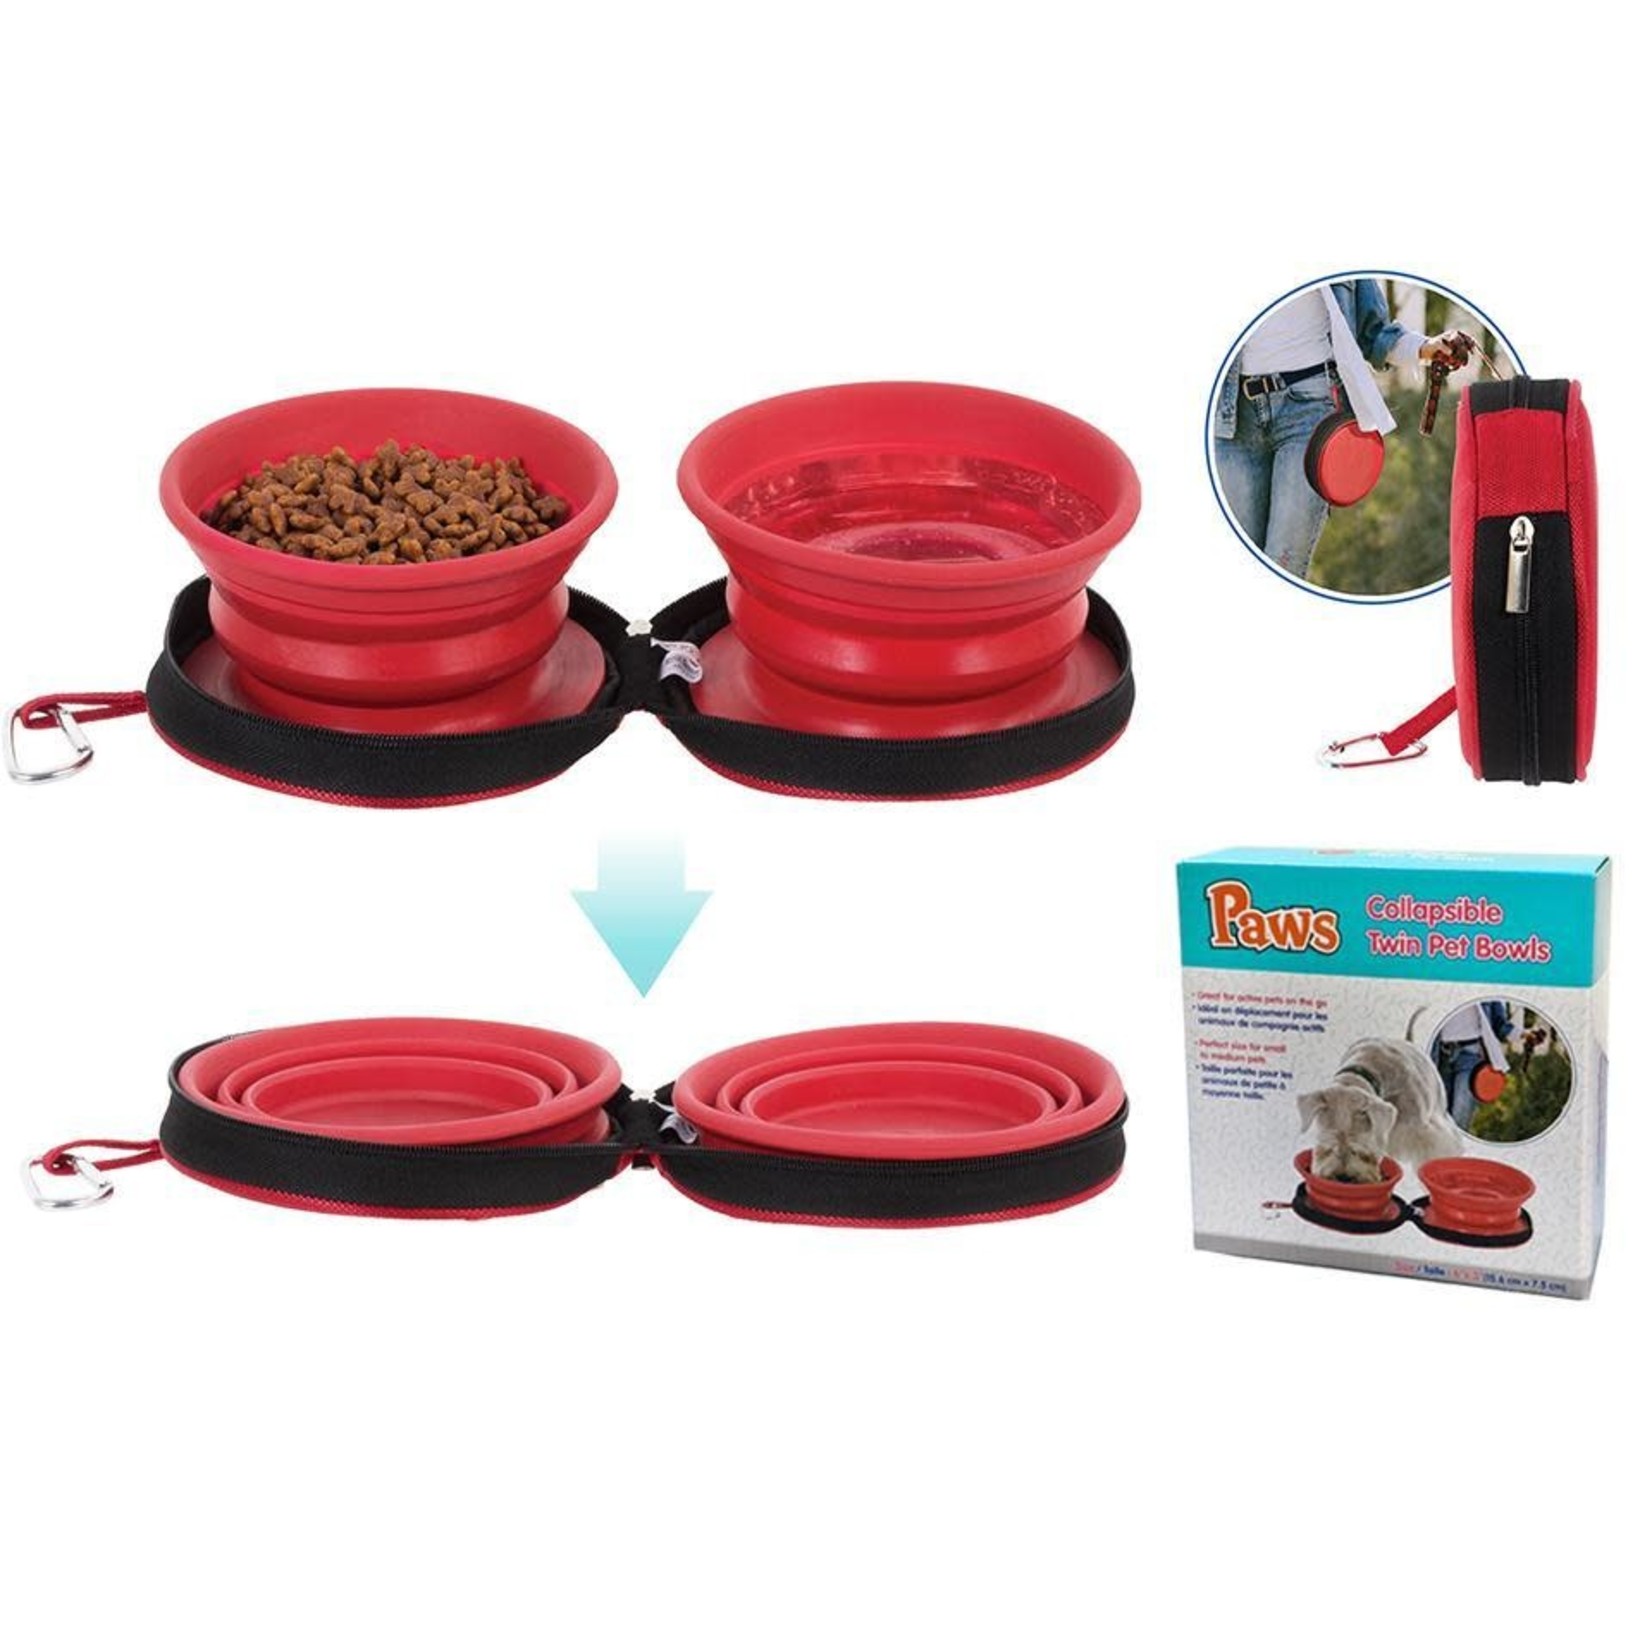 COLLAPSIBLE TWIN PET BOWLS